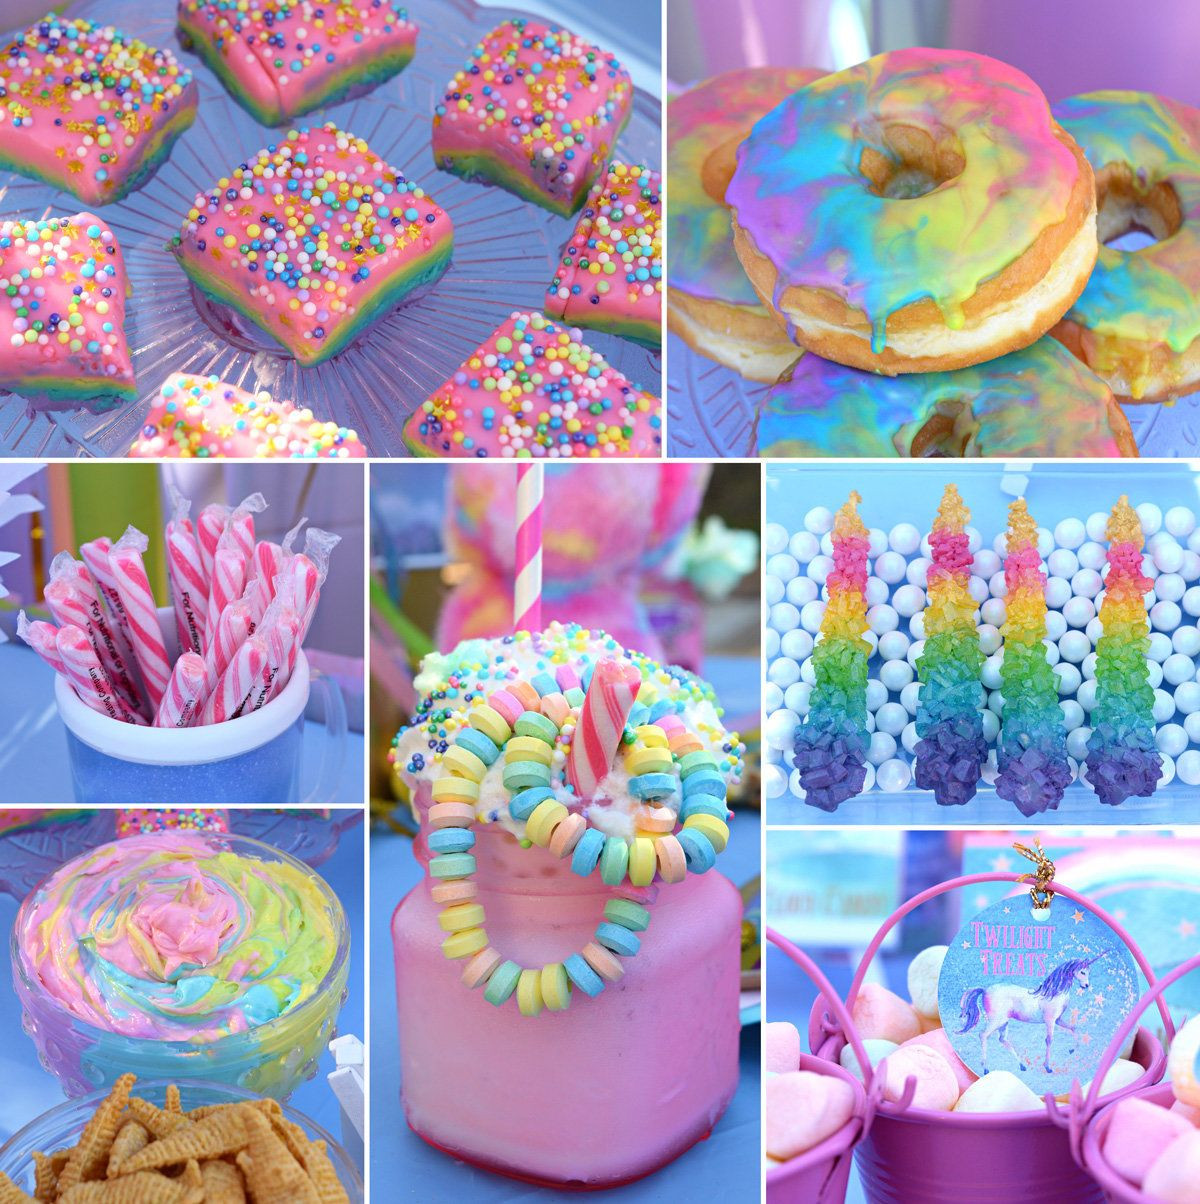 Rainbow And Unicorn Party Ideas
 Unicorn food Party Ideas in 2019